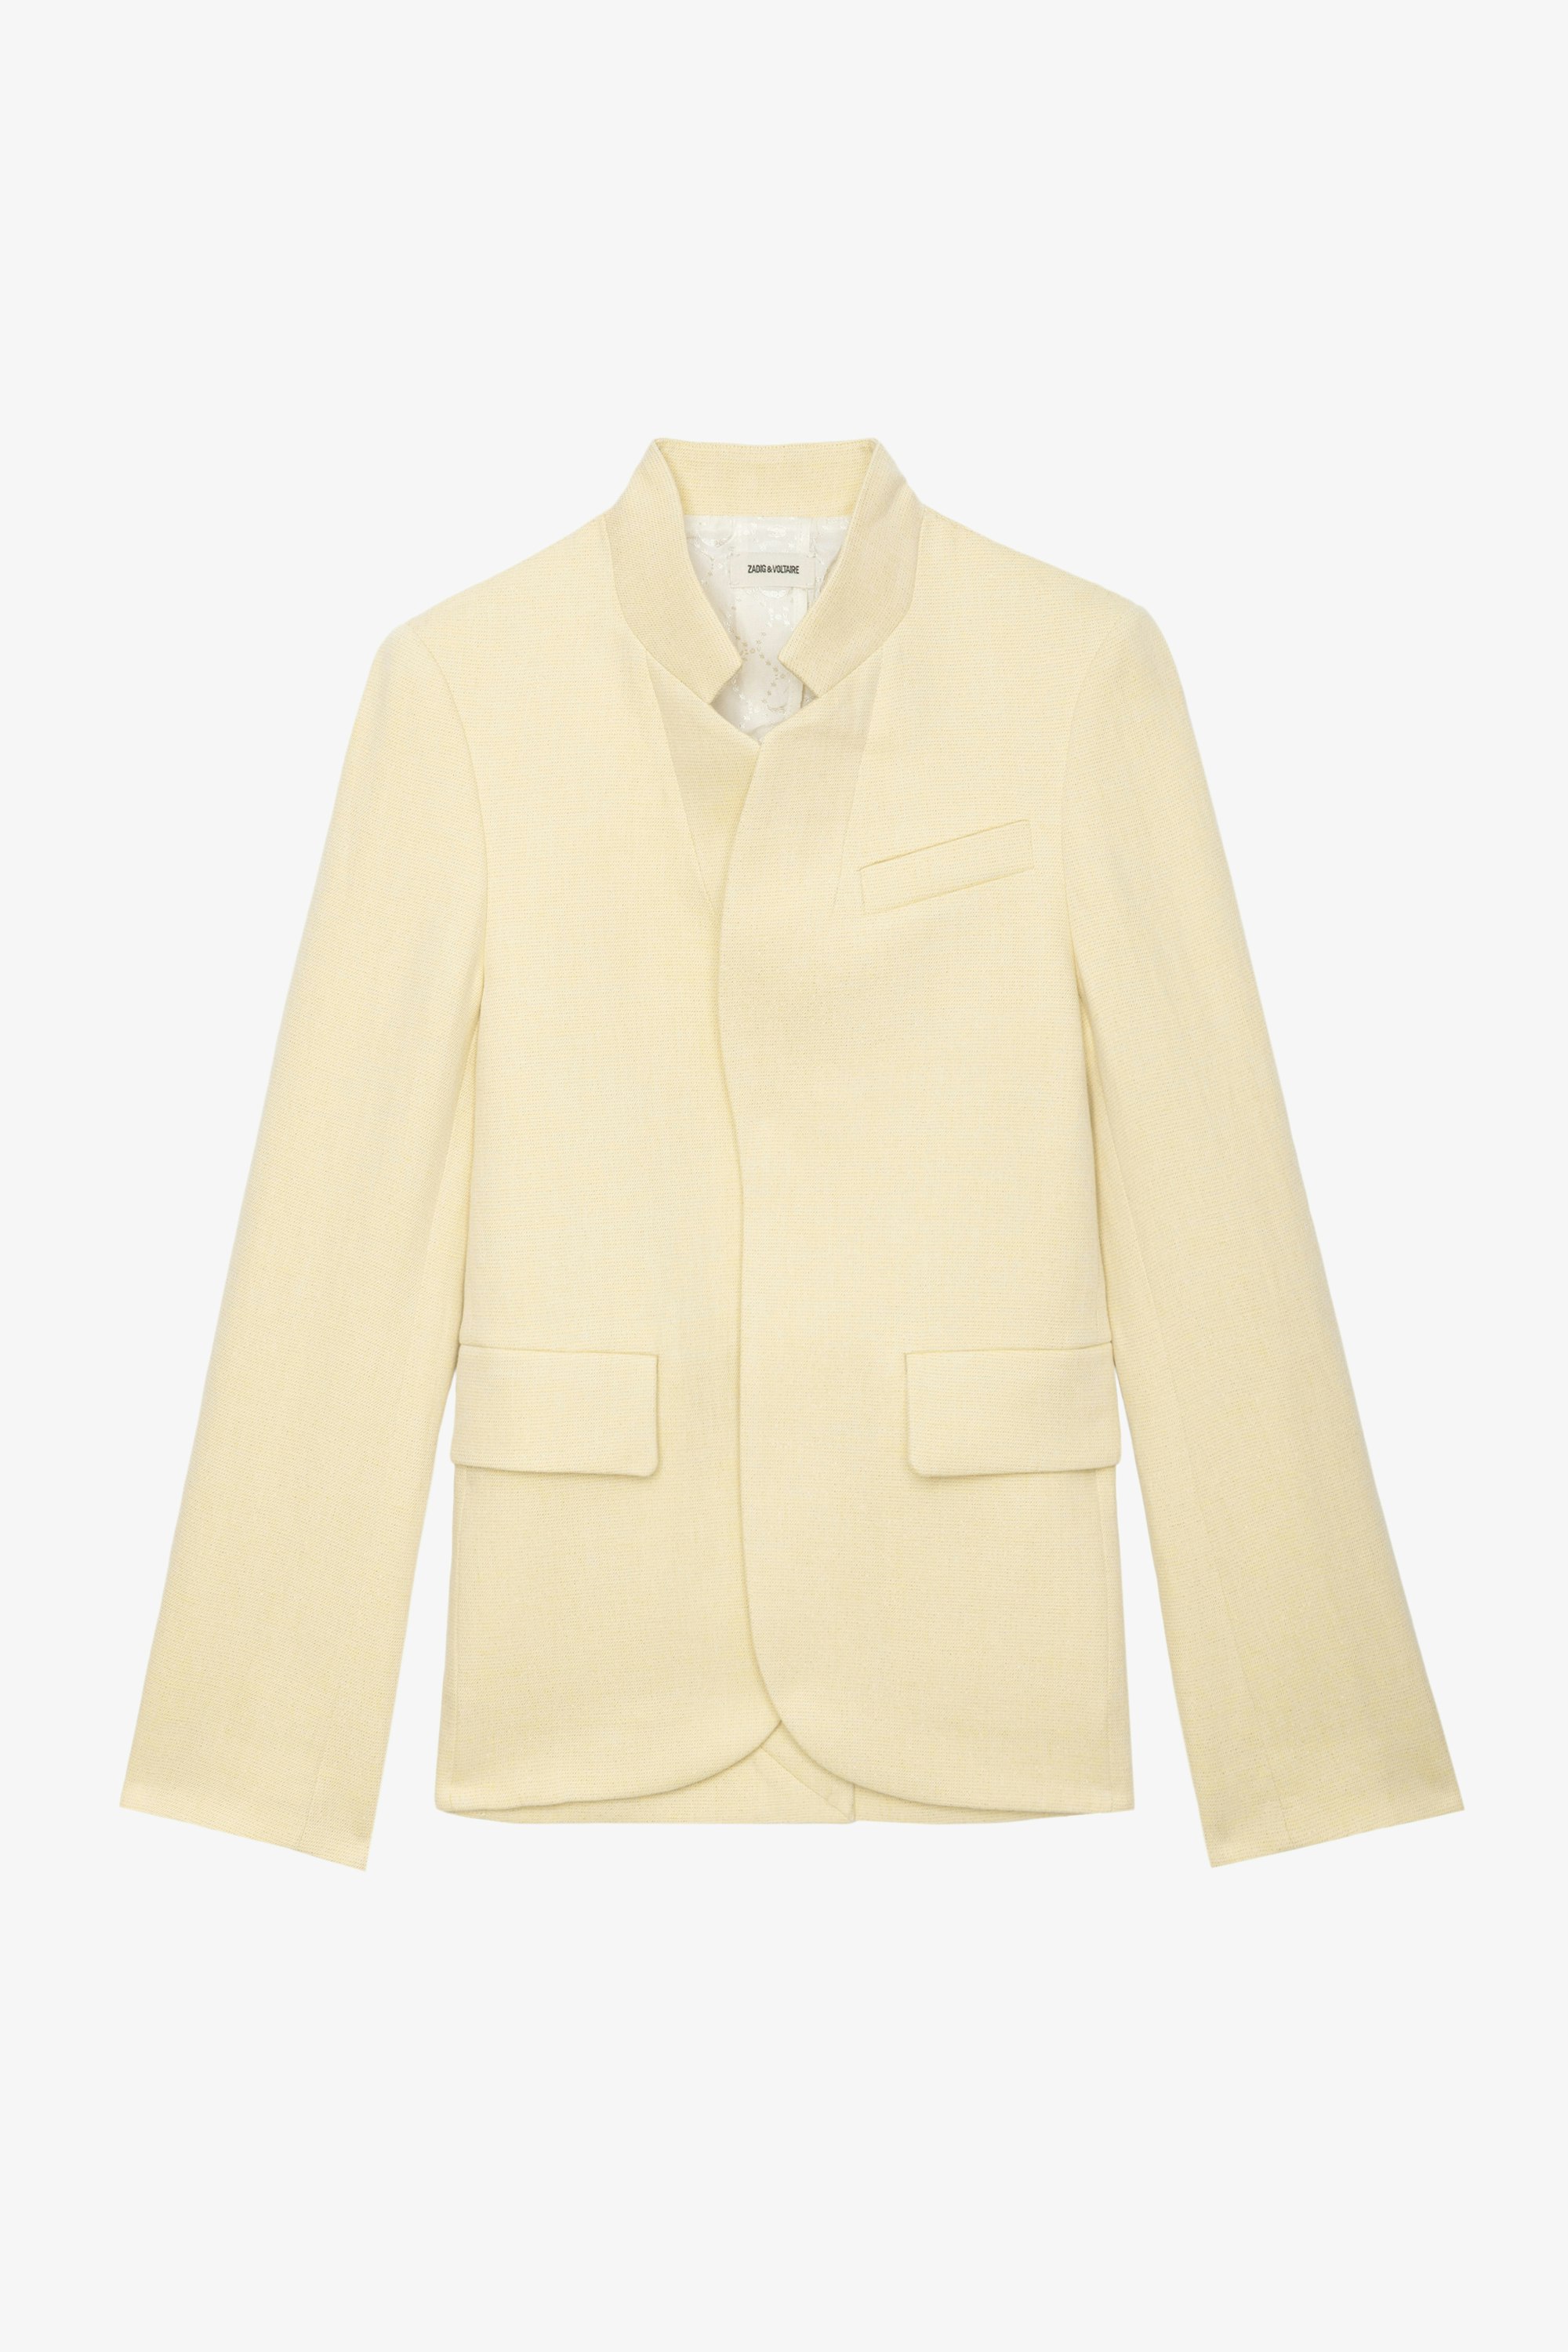 Very Blazer - Light yellow linen tailored blazer with mock neck and pockets.